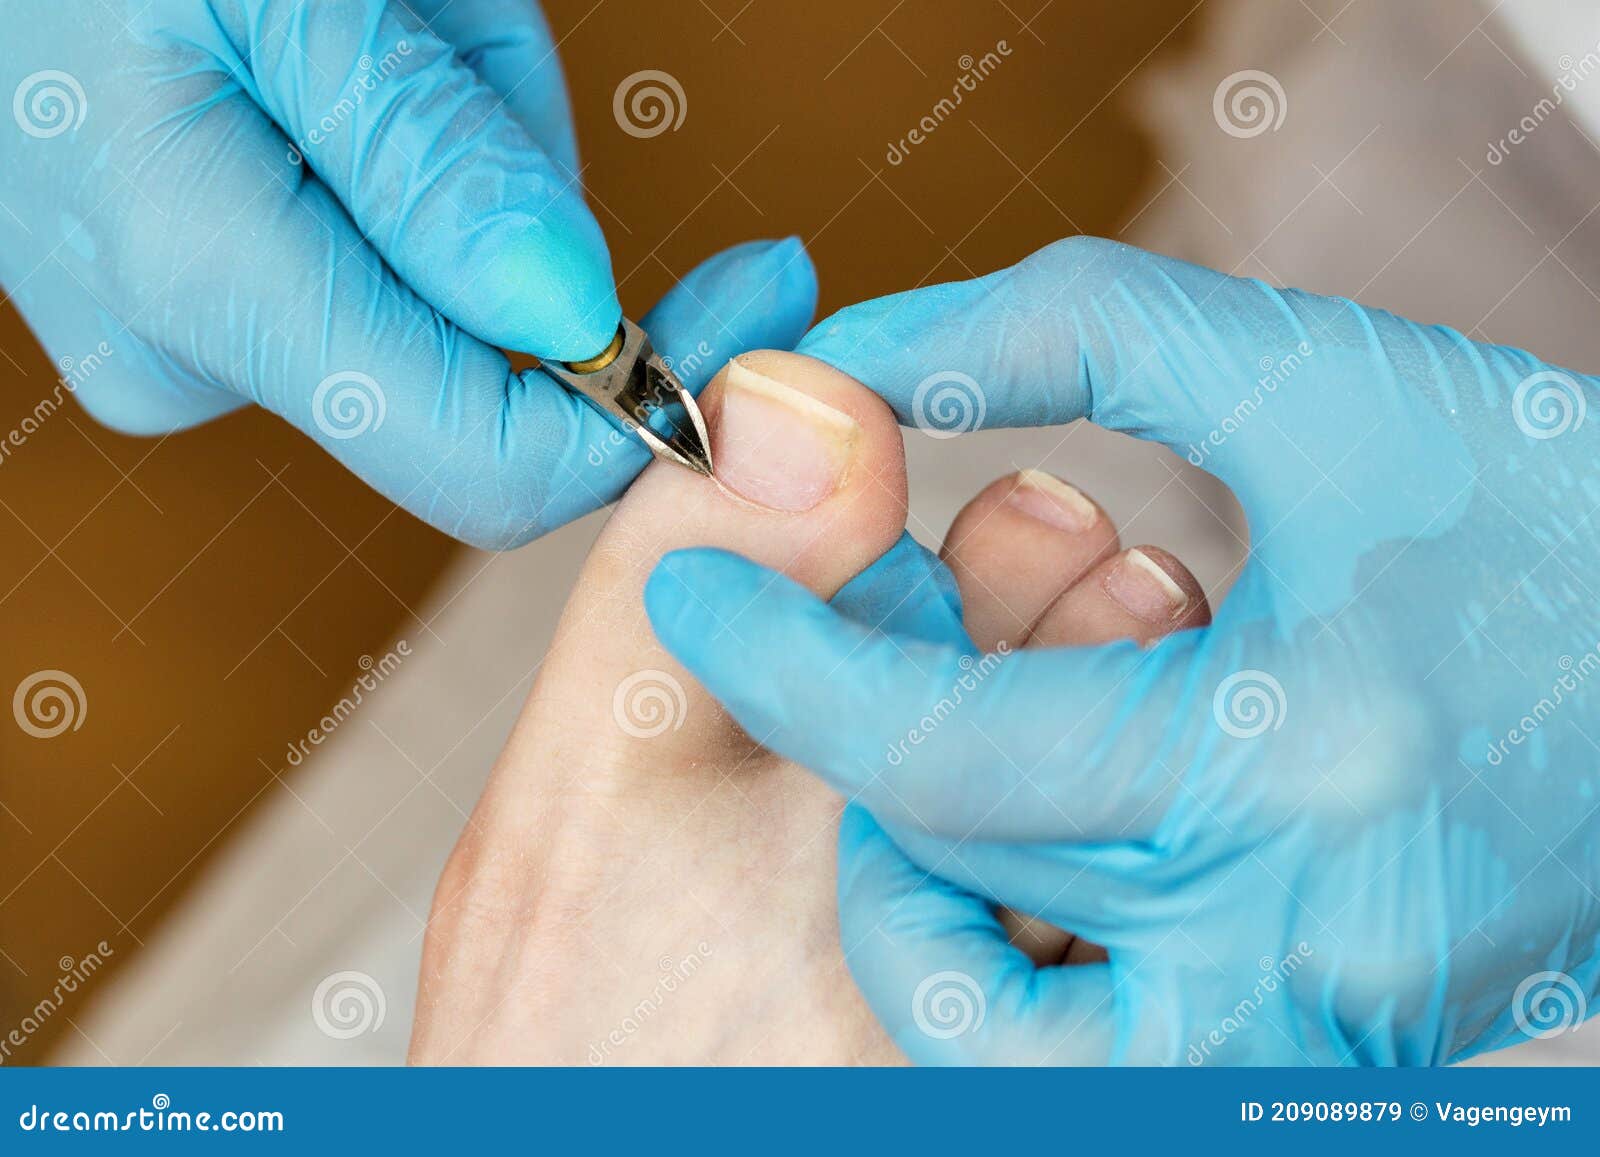 master chiropody removes cuticle